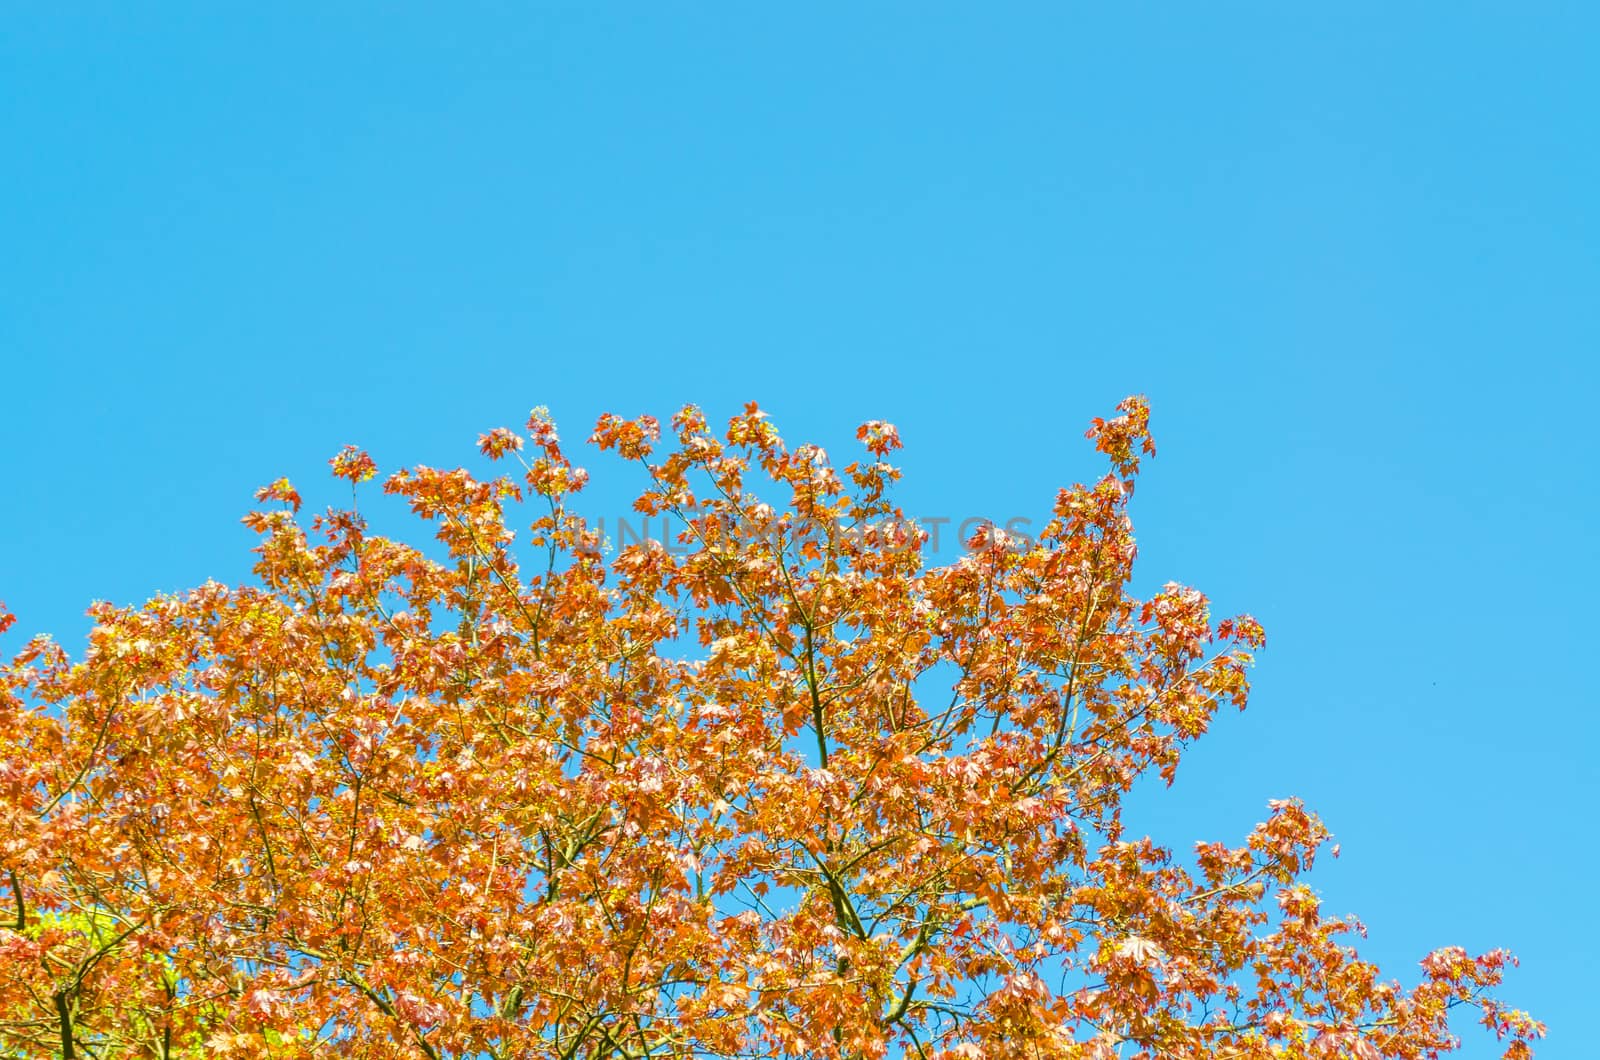 Herb-colored tree top and blue sky by JFsPic